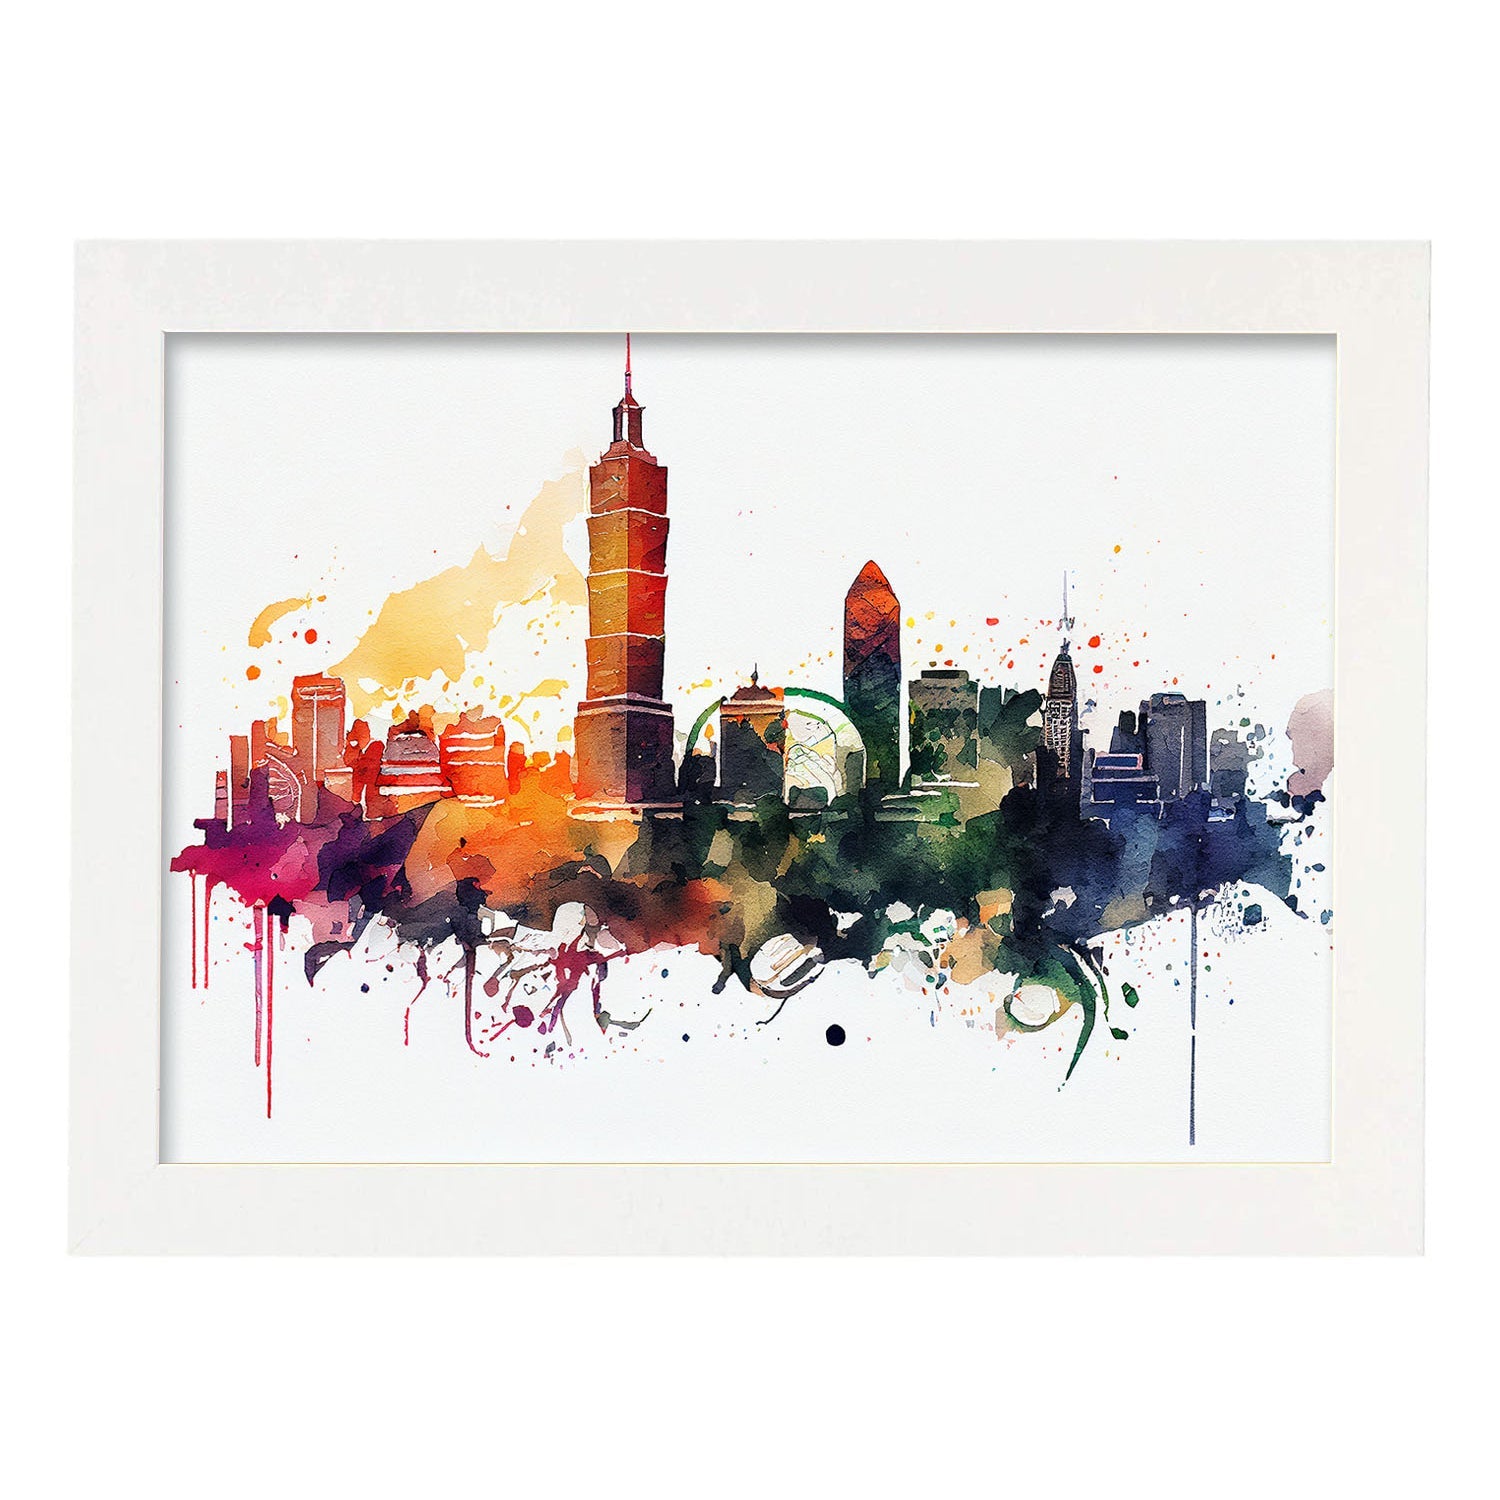 Nacnic watercolor of a skyline of the city of Taipei. Aesthetic Wall Art Prints for Bedroom or Living Room Design.-Artwork-Nacnic-A4-Marco Blanco-Nacnic Estudio SL